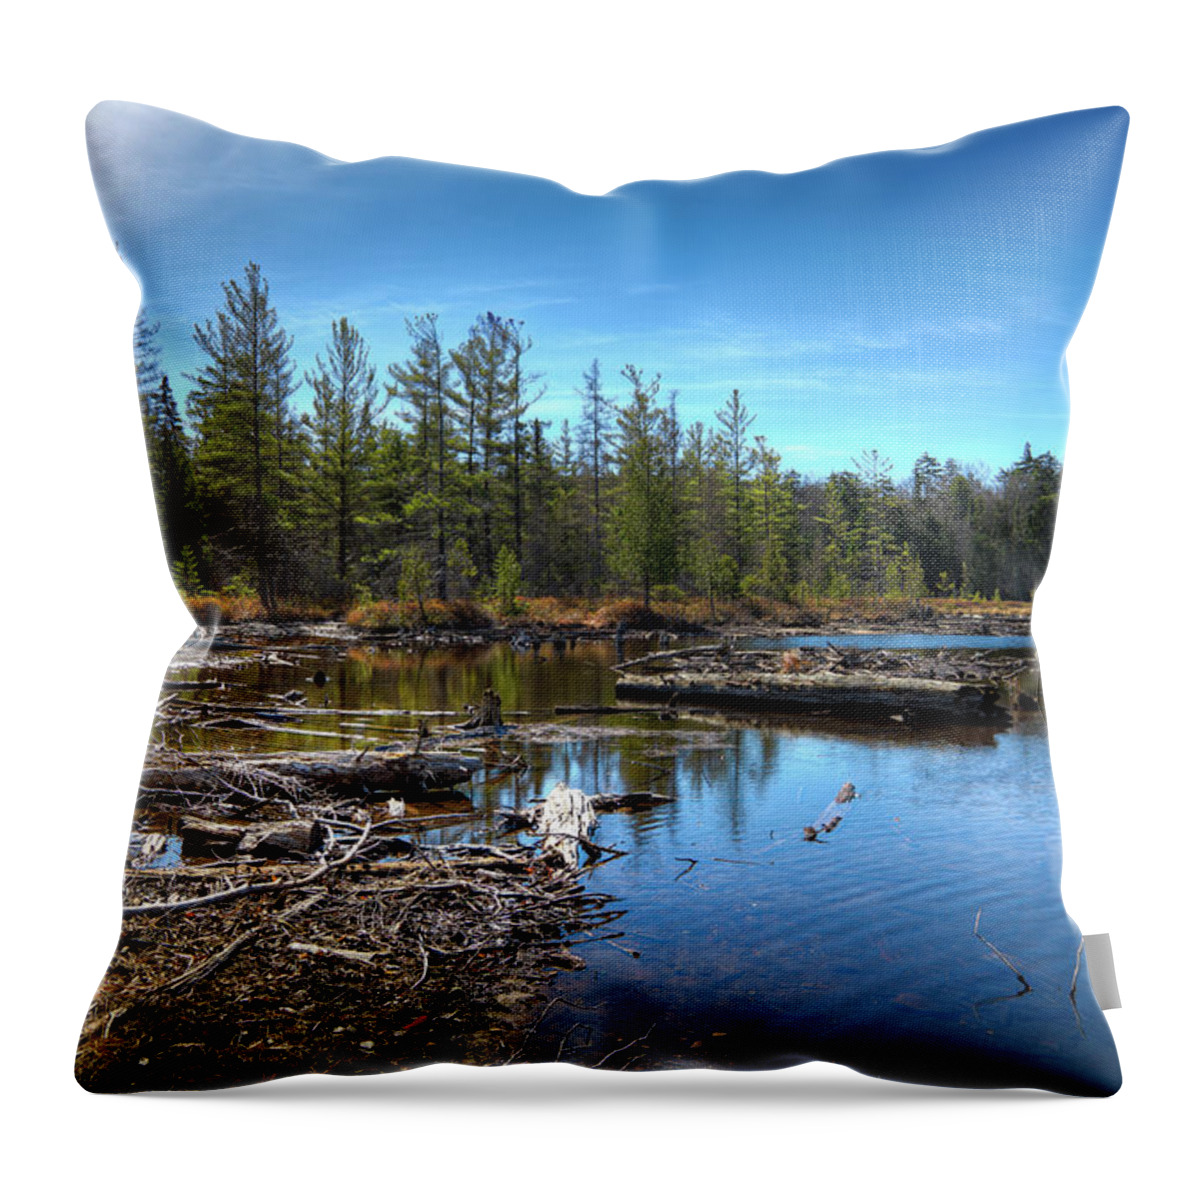 8th Lake Channel Throw Pillow featuring the photograph 8th Lake Channel by David Patterson